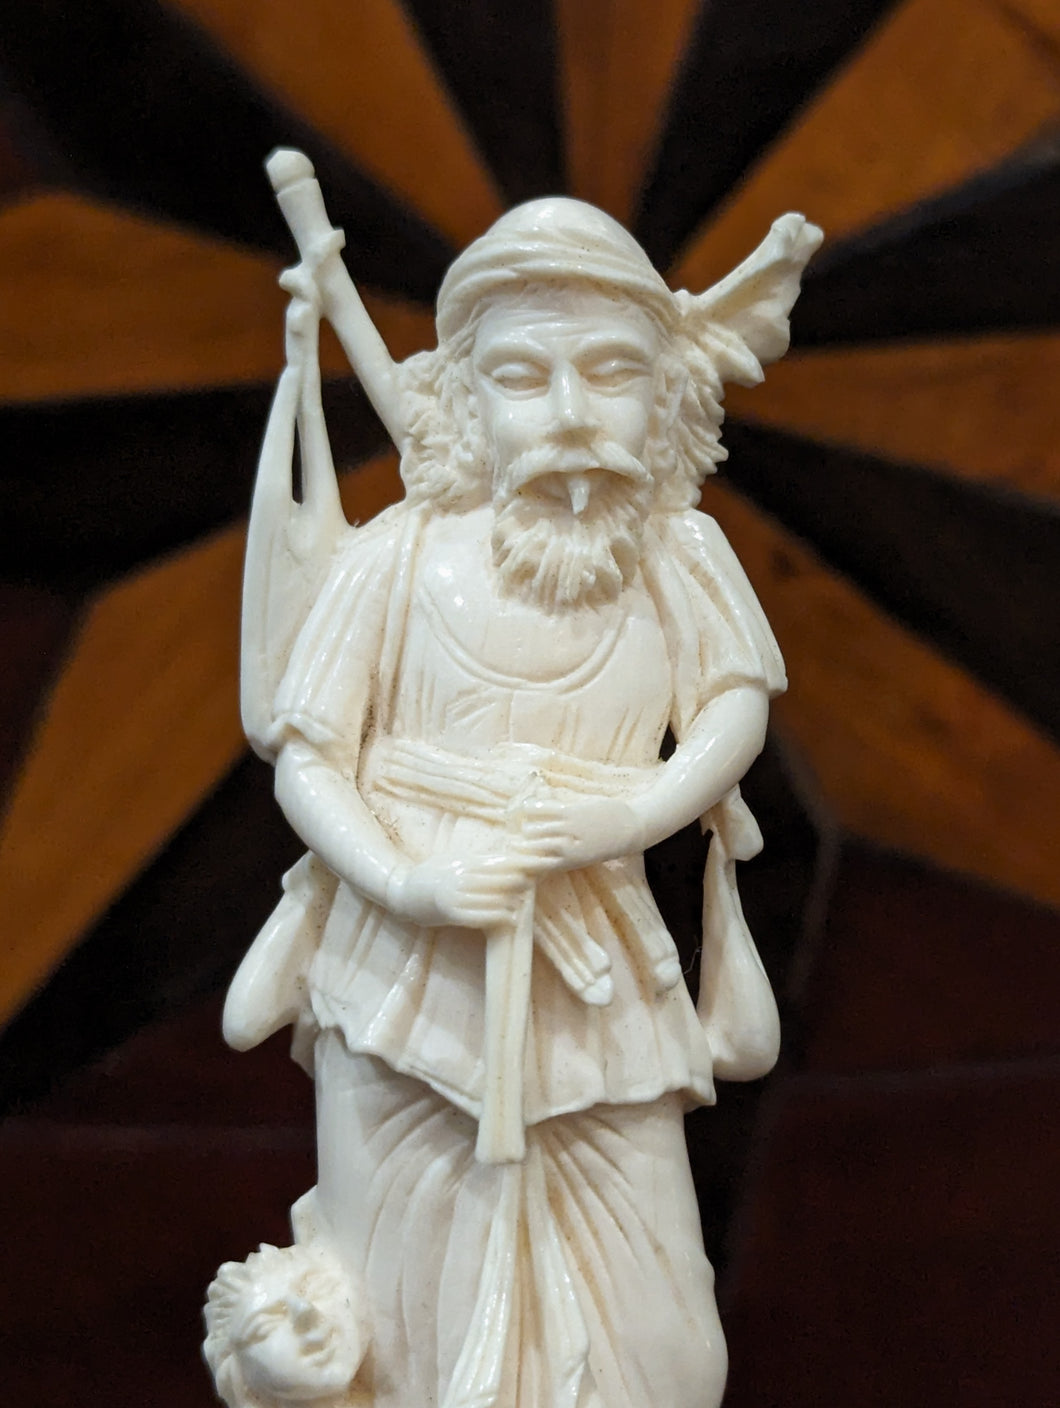 Ivory Carving of a Travelling Man, Child & Snake